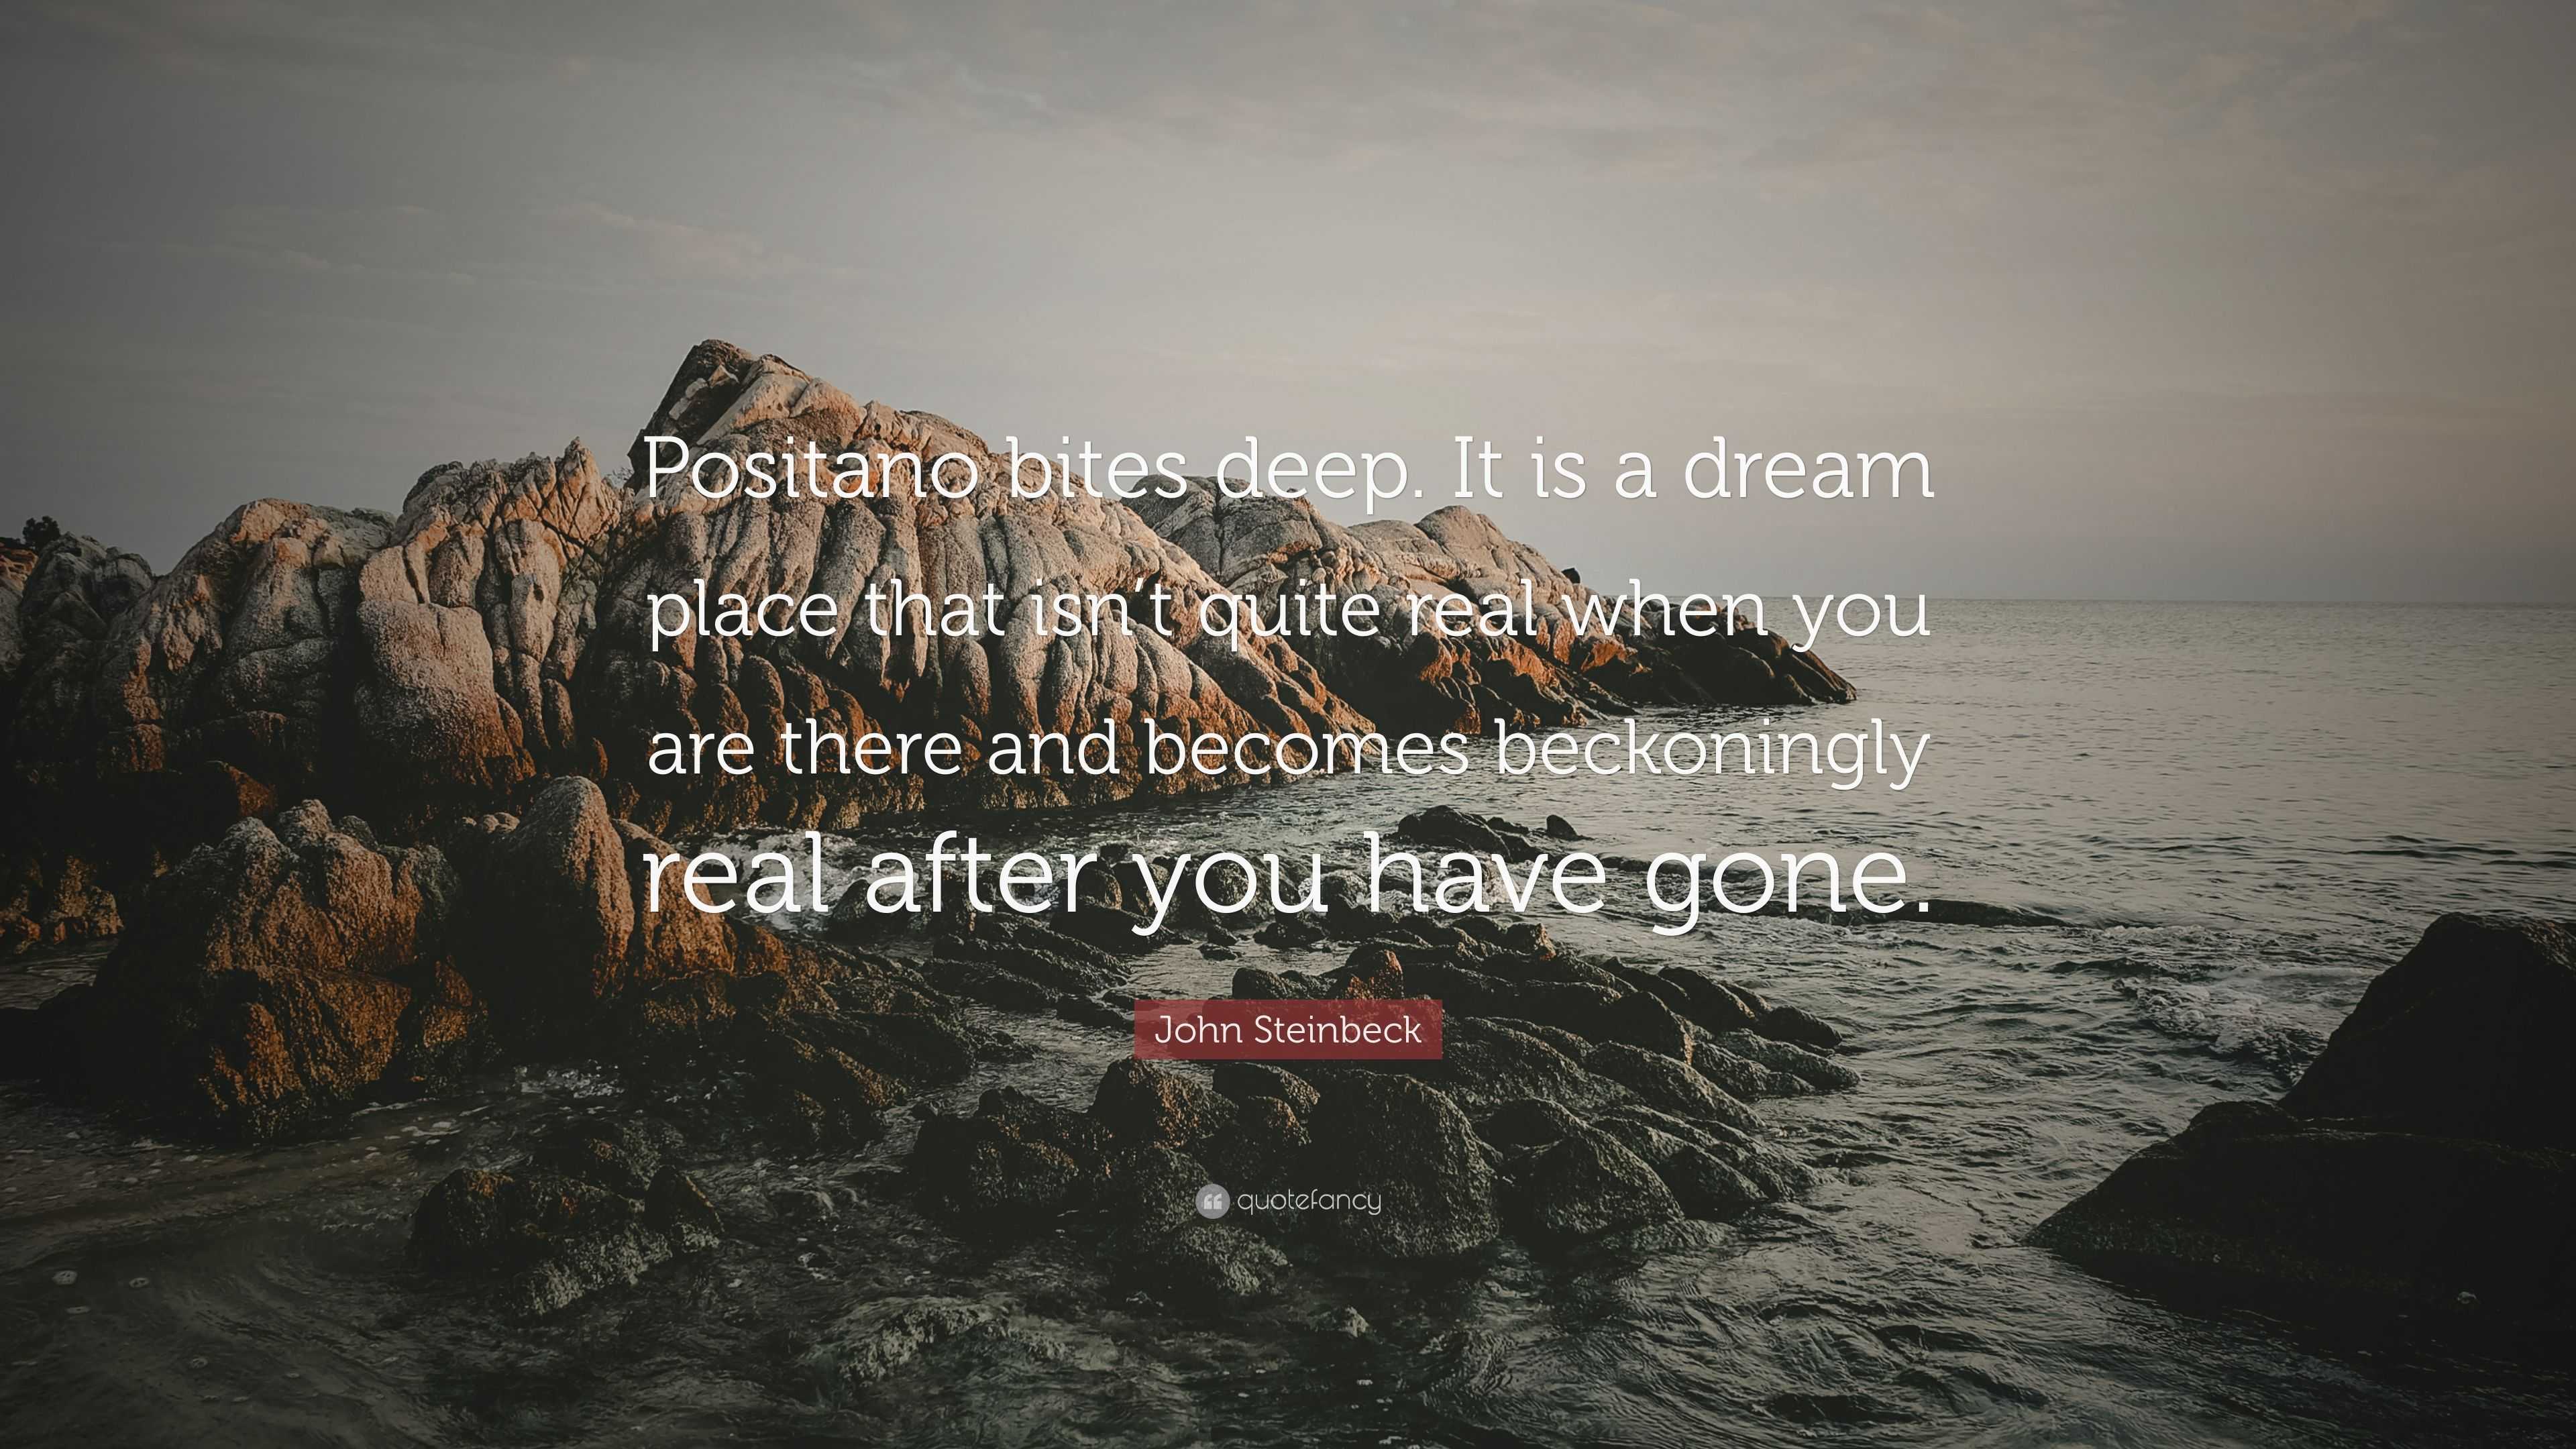 John Steinbeck Quote: “Positano bites deep. It is a dream place that ...
